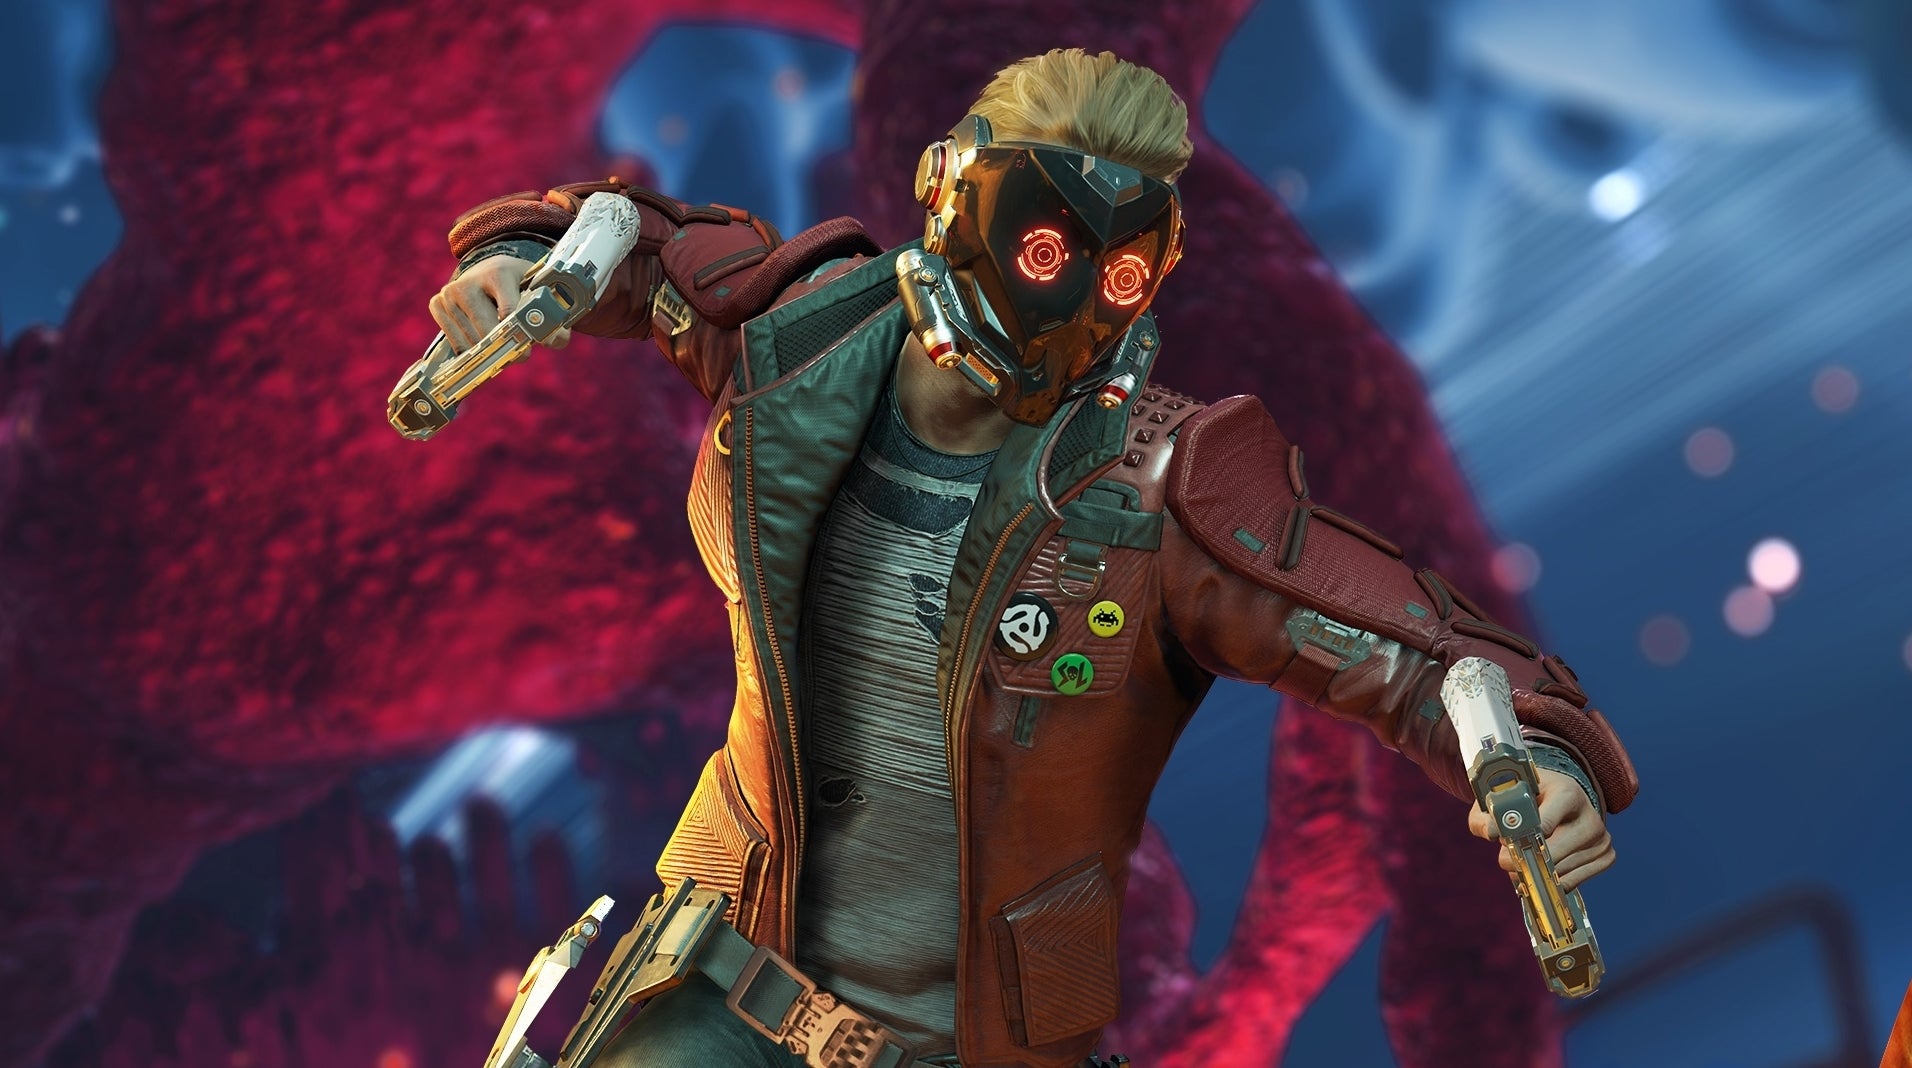 Image for Square Enix's Guardians of the Galaxy is single-player, without DLC or microtransactions